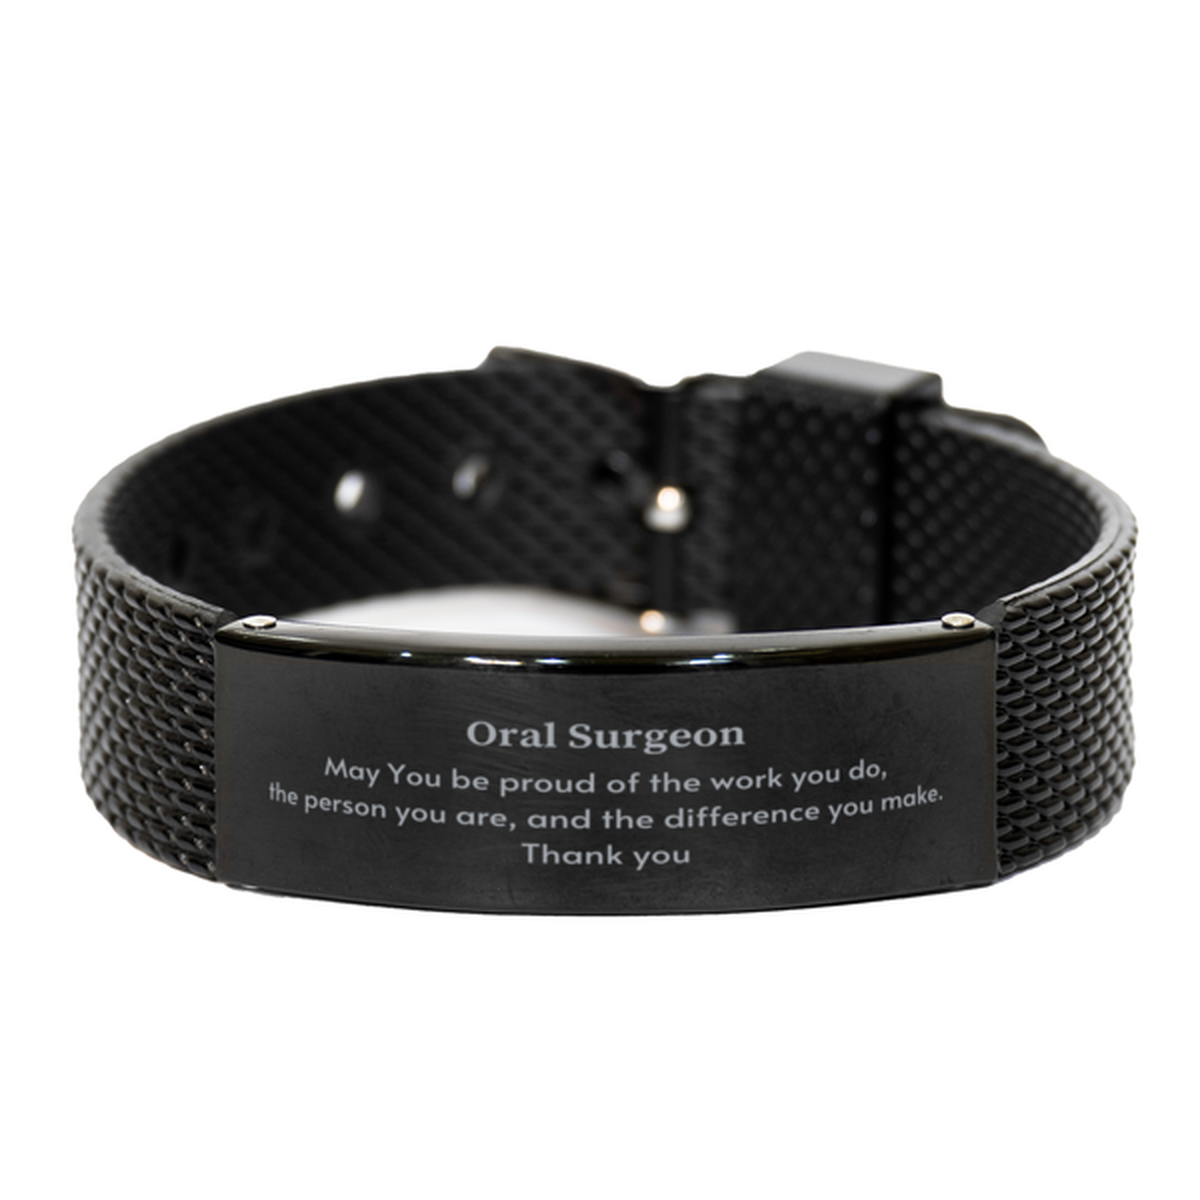 Heartwarming Black Shark Mesh Bracelet Retirement Coworkers Gifts for Oral Surgeon, Oral Surgeon May You be proud of the work you do, the person you are Gifts for Boss Men Women Friends